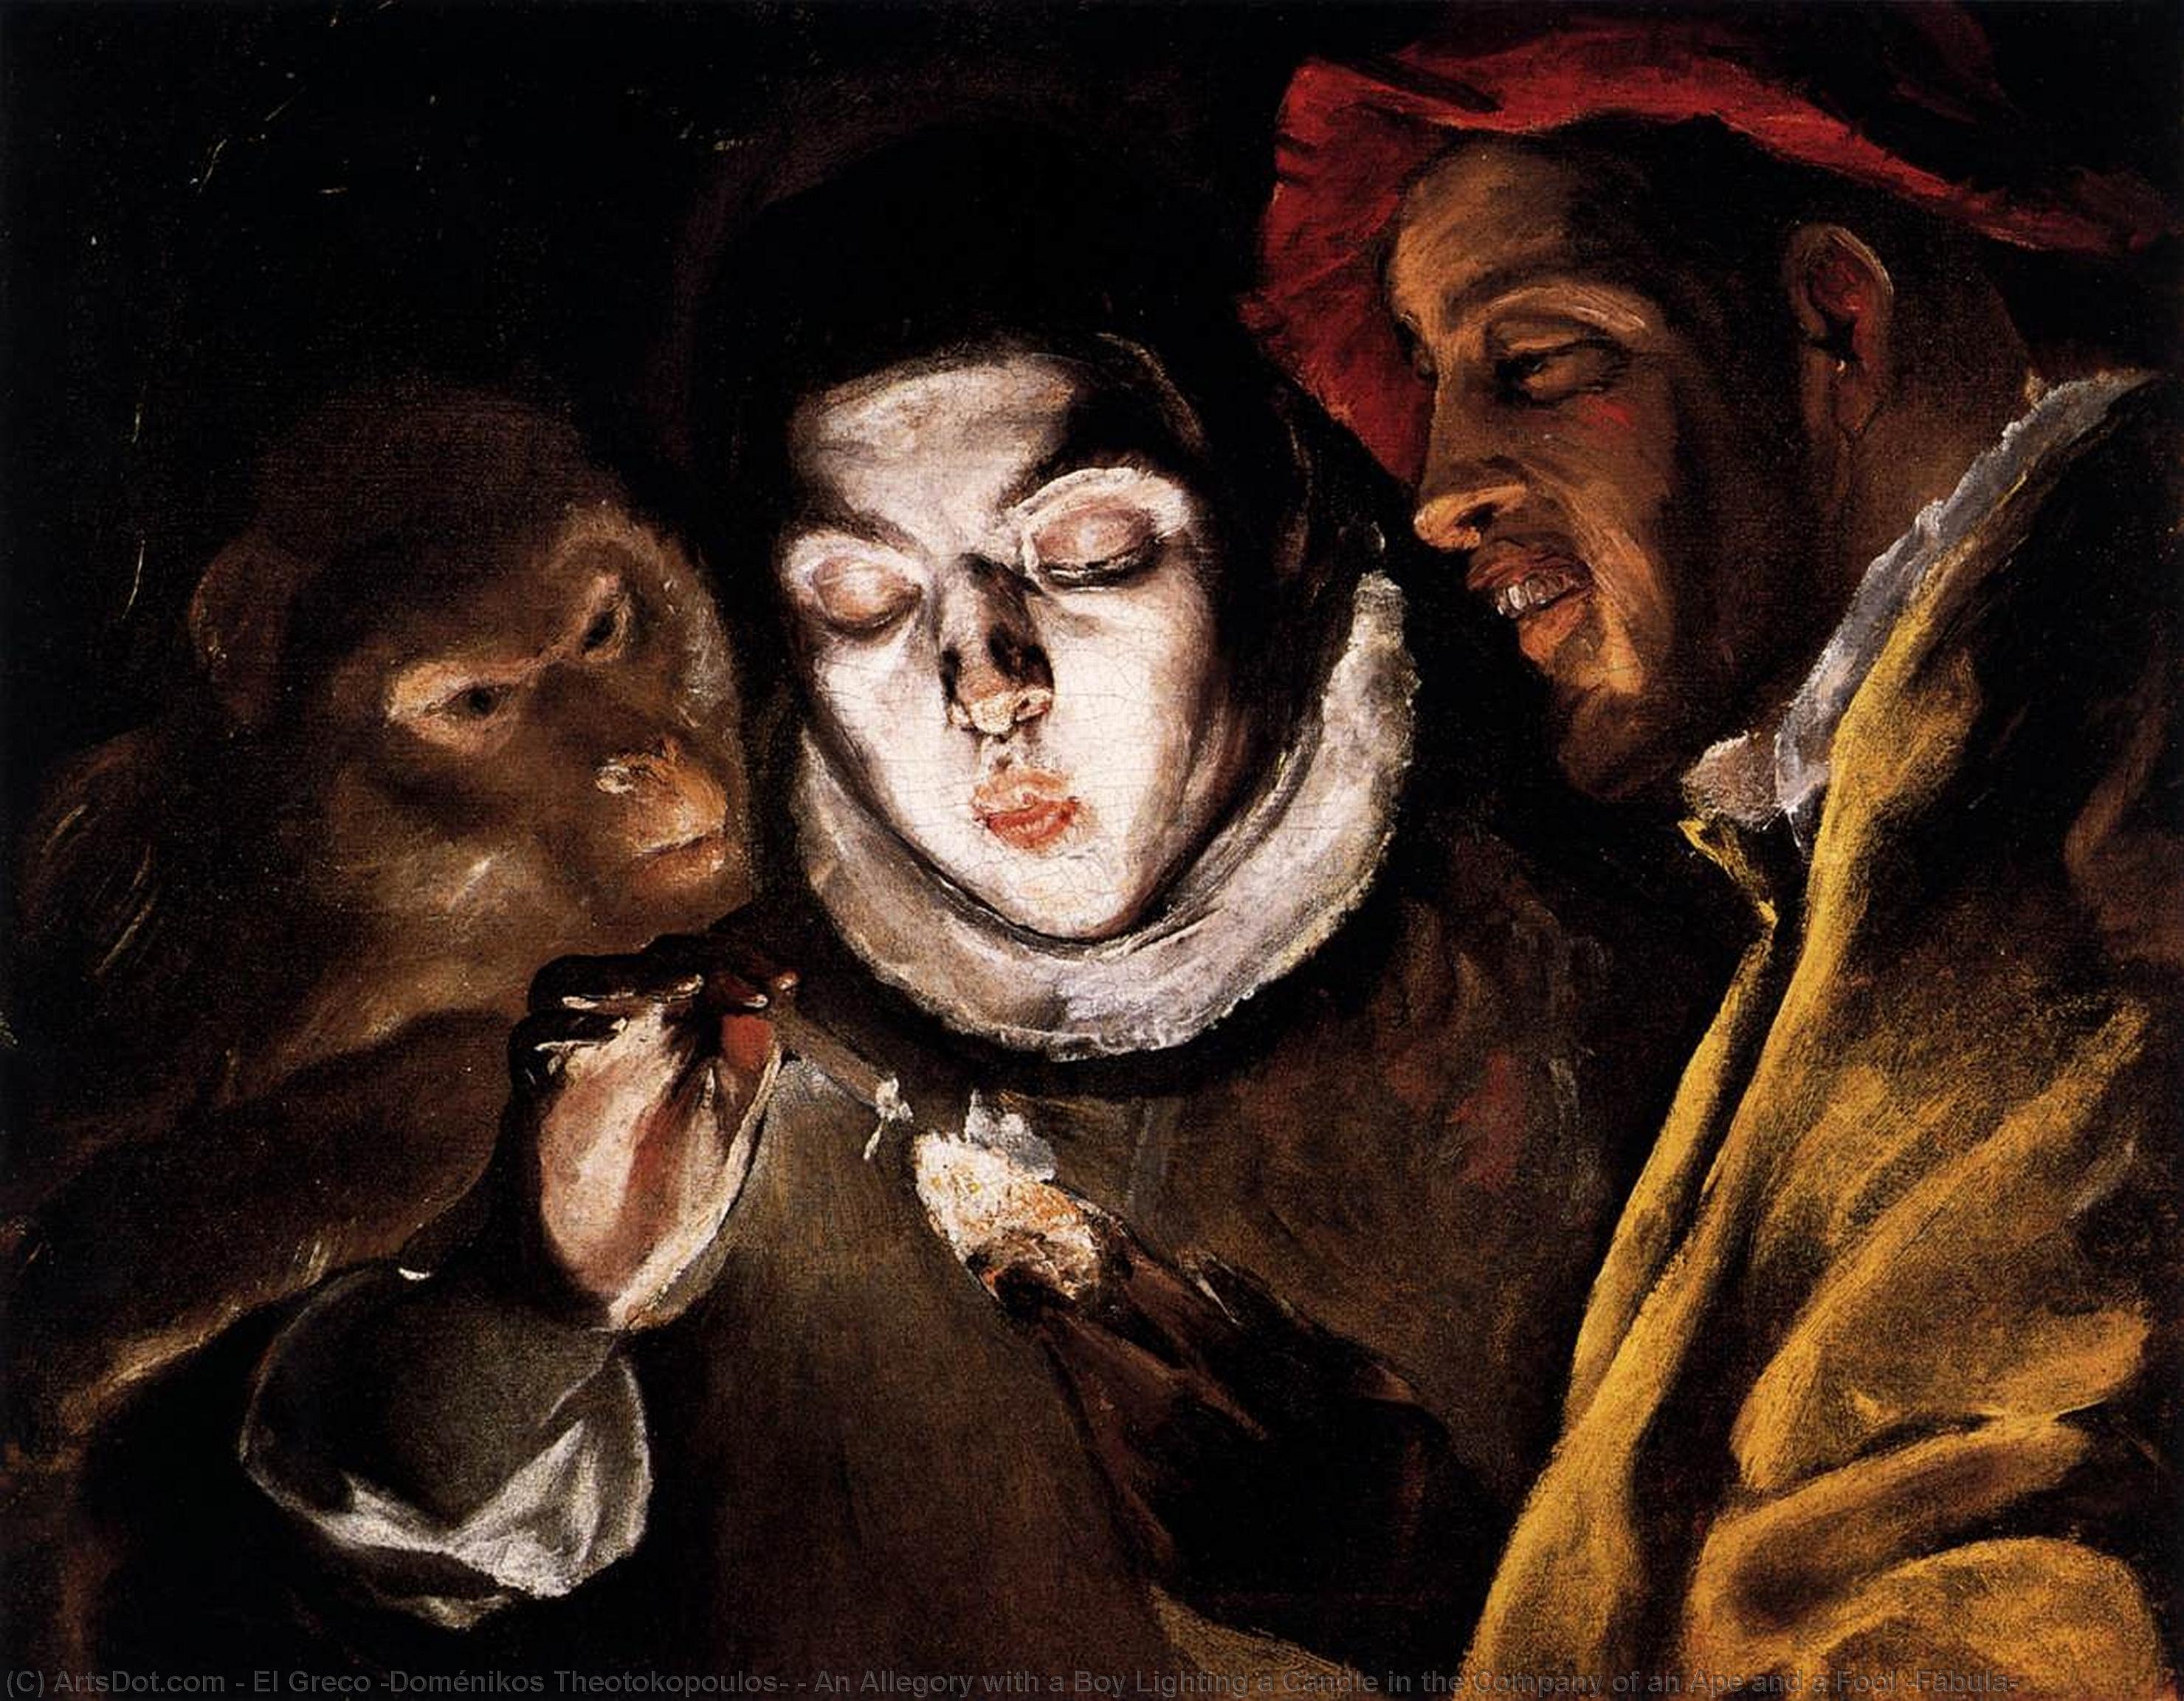 WikiOO.org - Encyclopedia of Fine Arts - Lukisan, Artwork El Greco (Doménikos Theotokopoulos) - An Allegory with a Boy Lighting a Candle in the Company of an Ape and a Fool (Fábula)